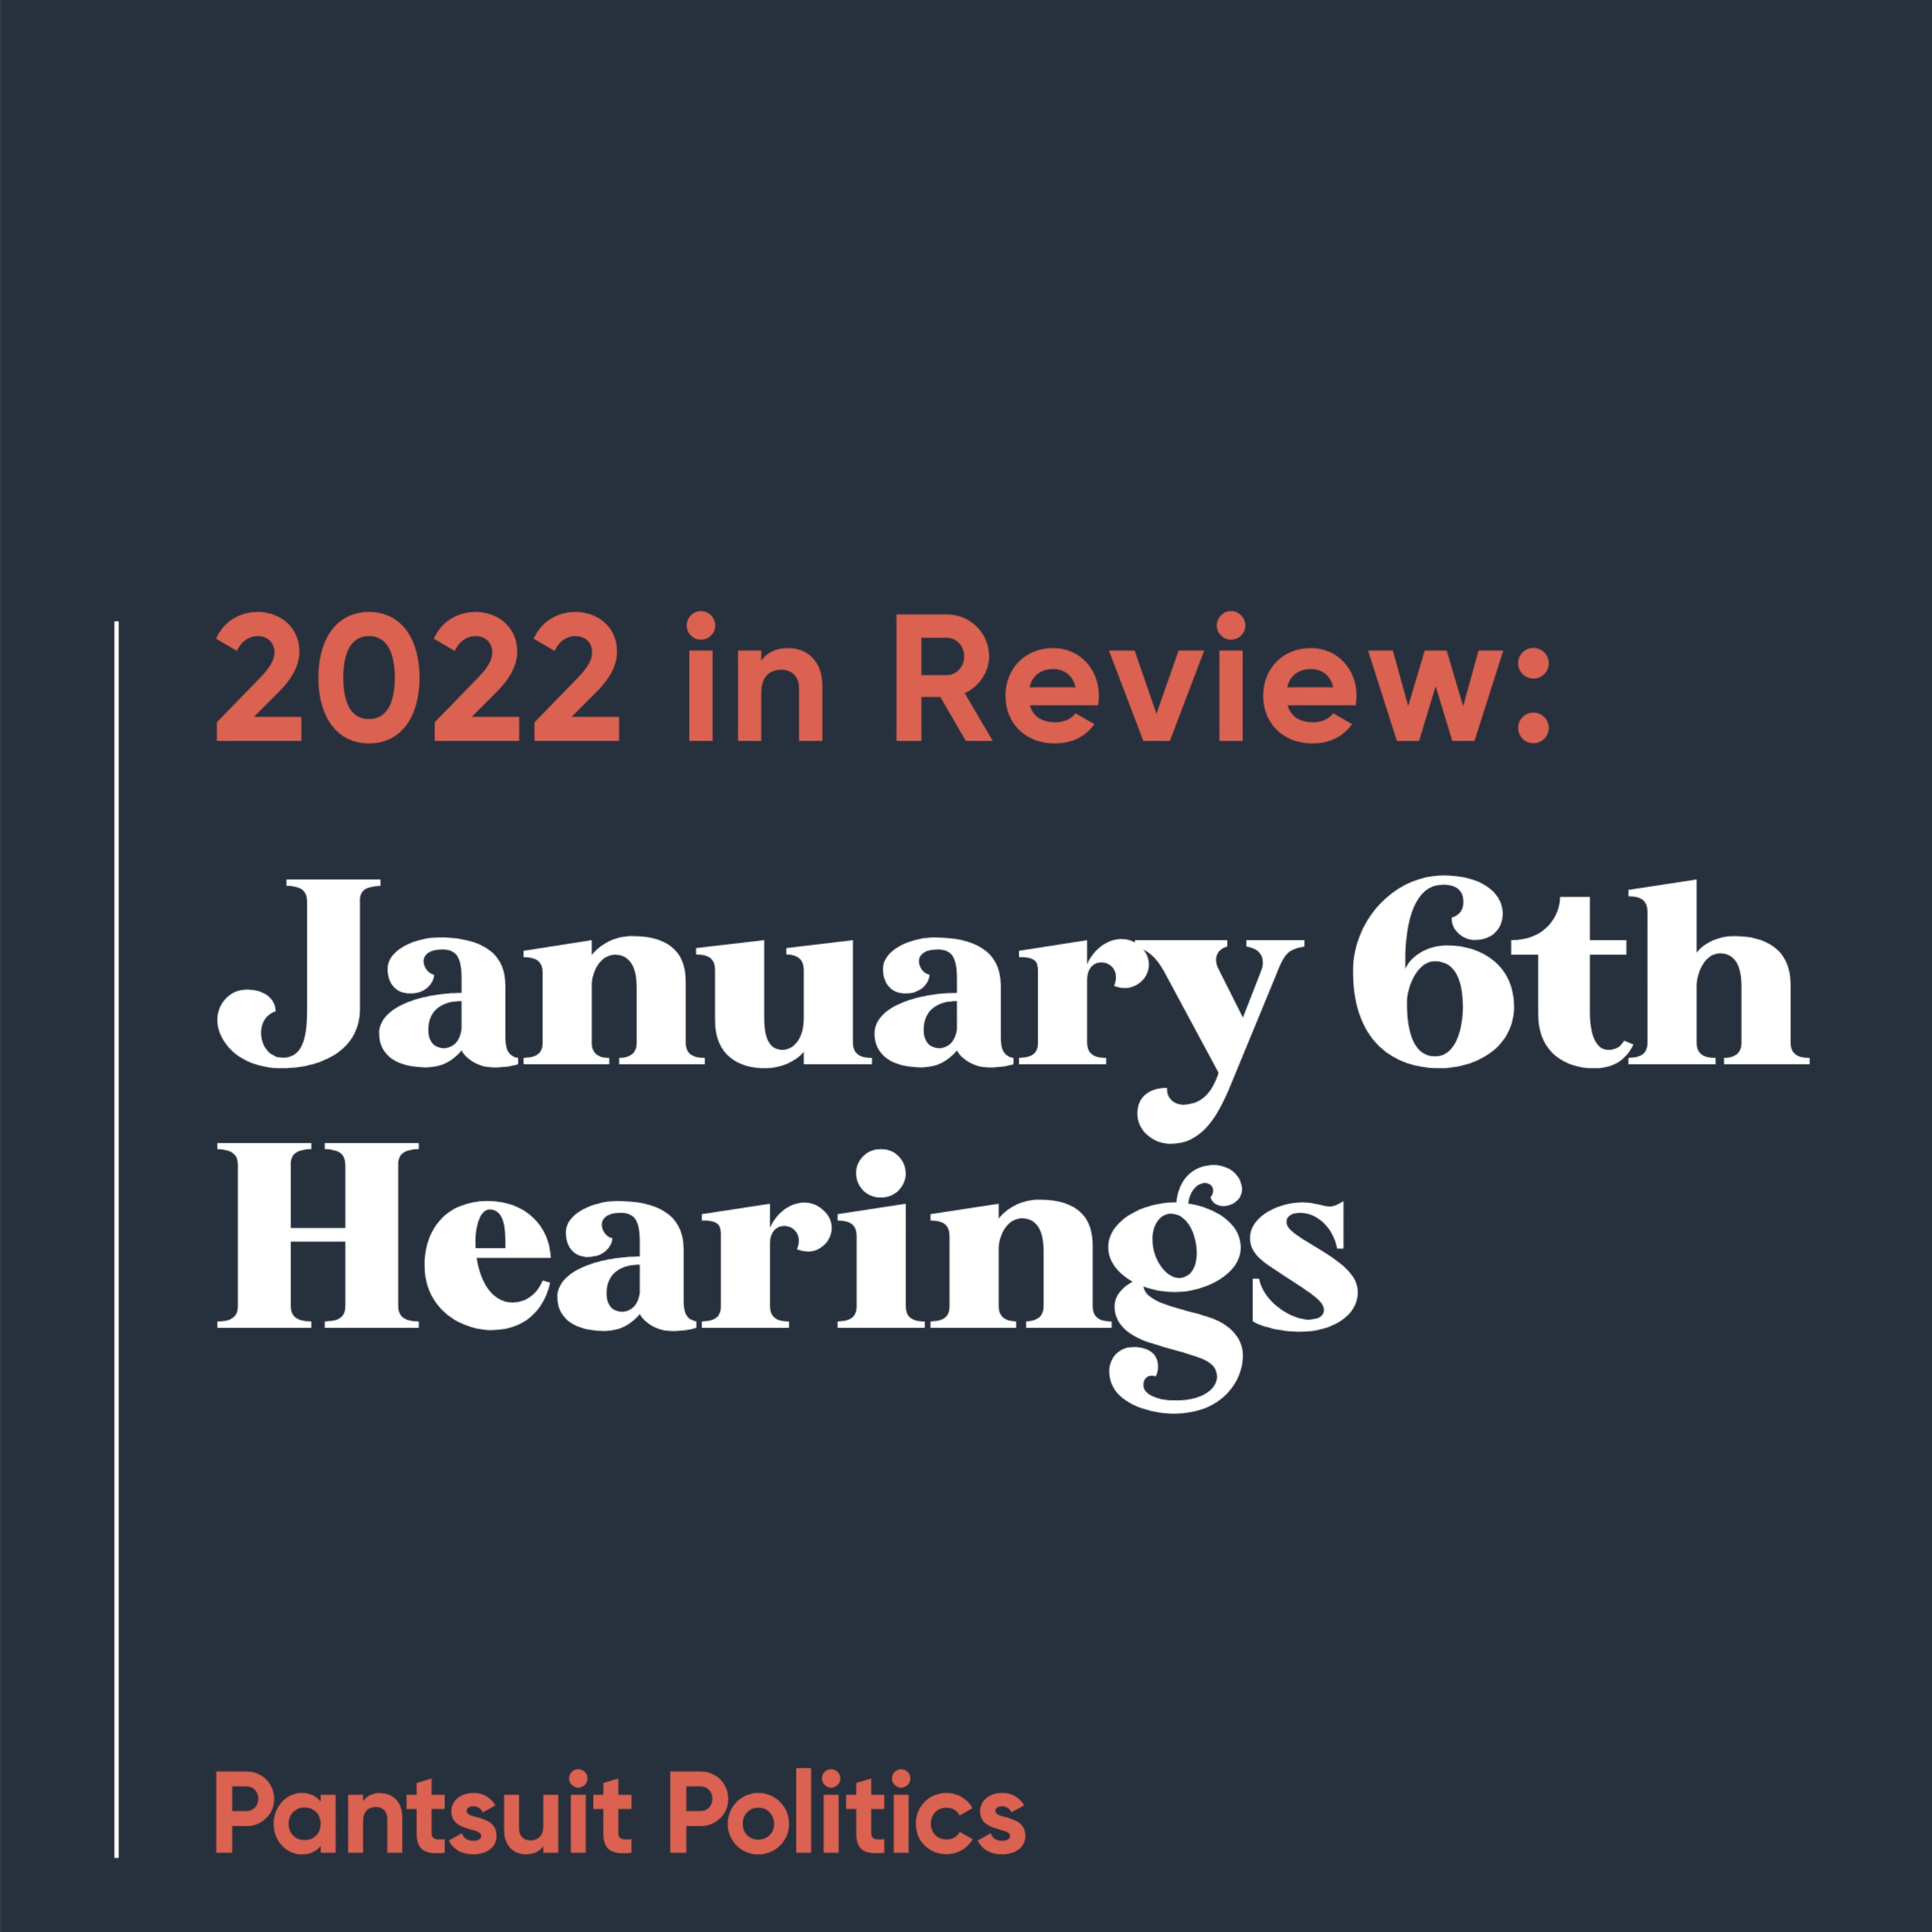 2022 in Review: January 6th Hearings